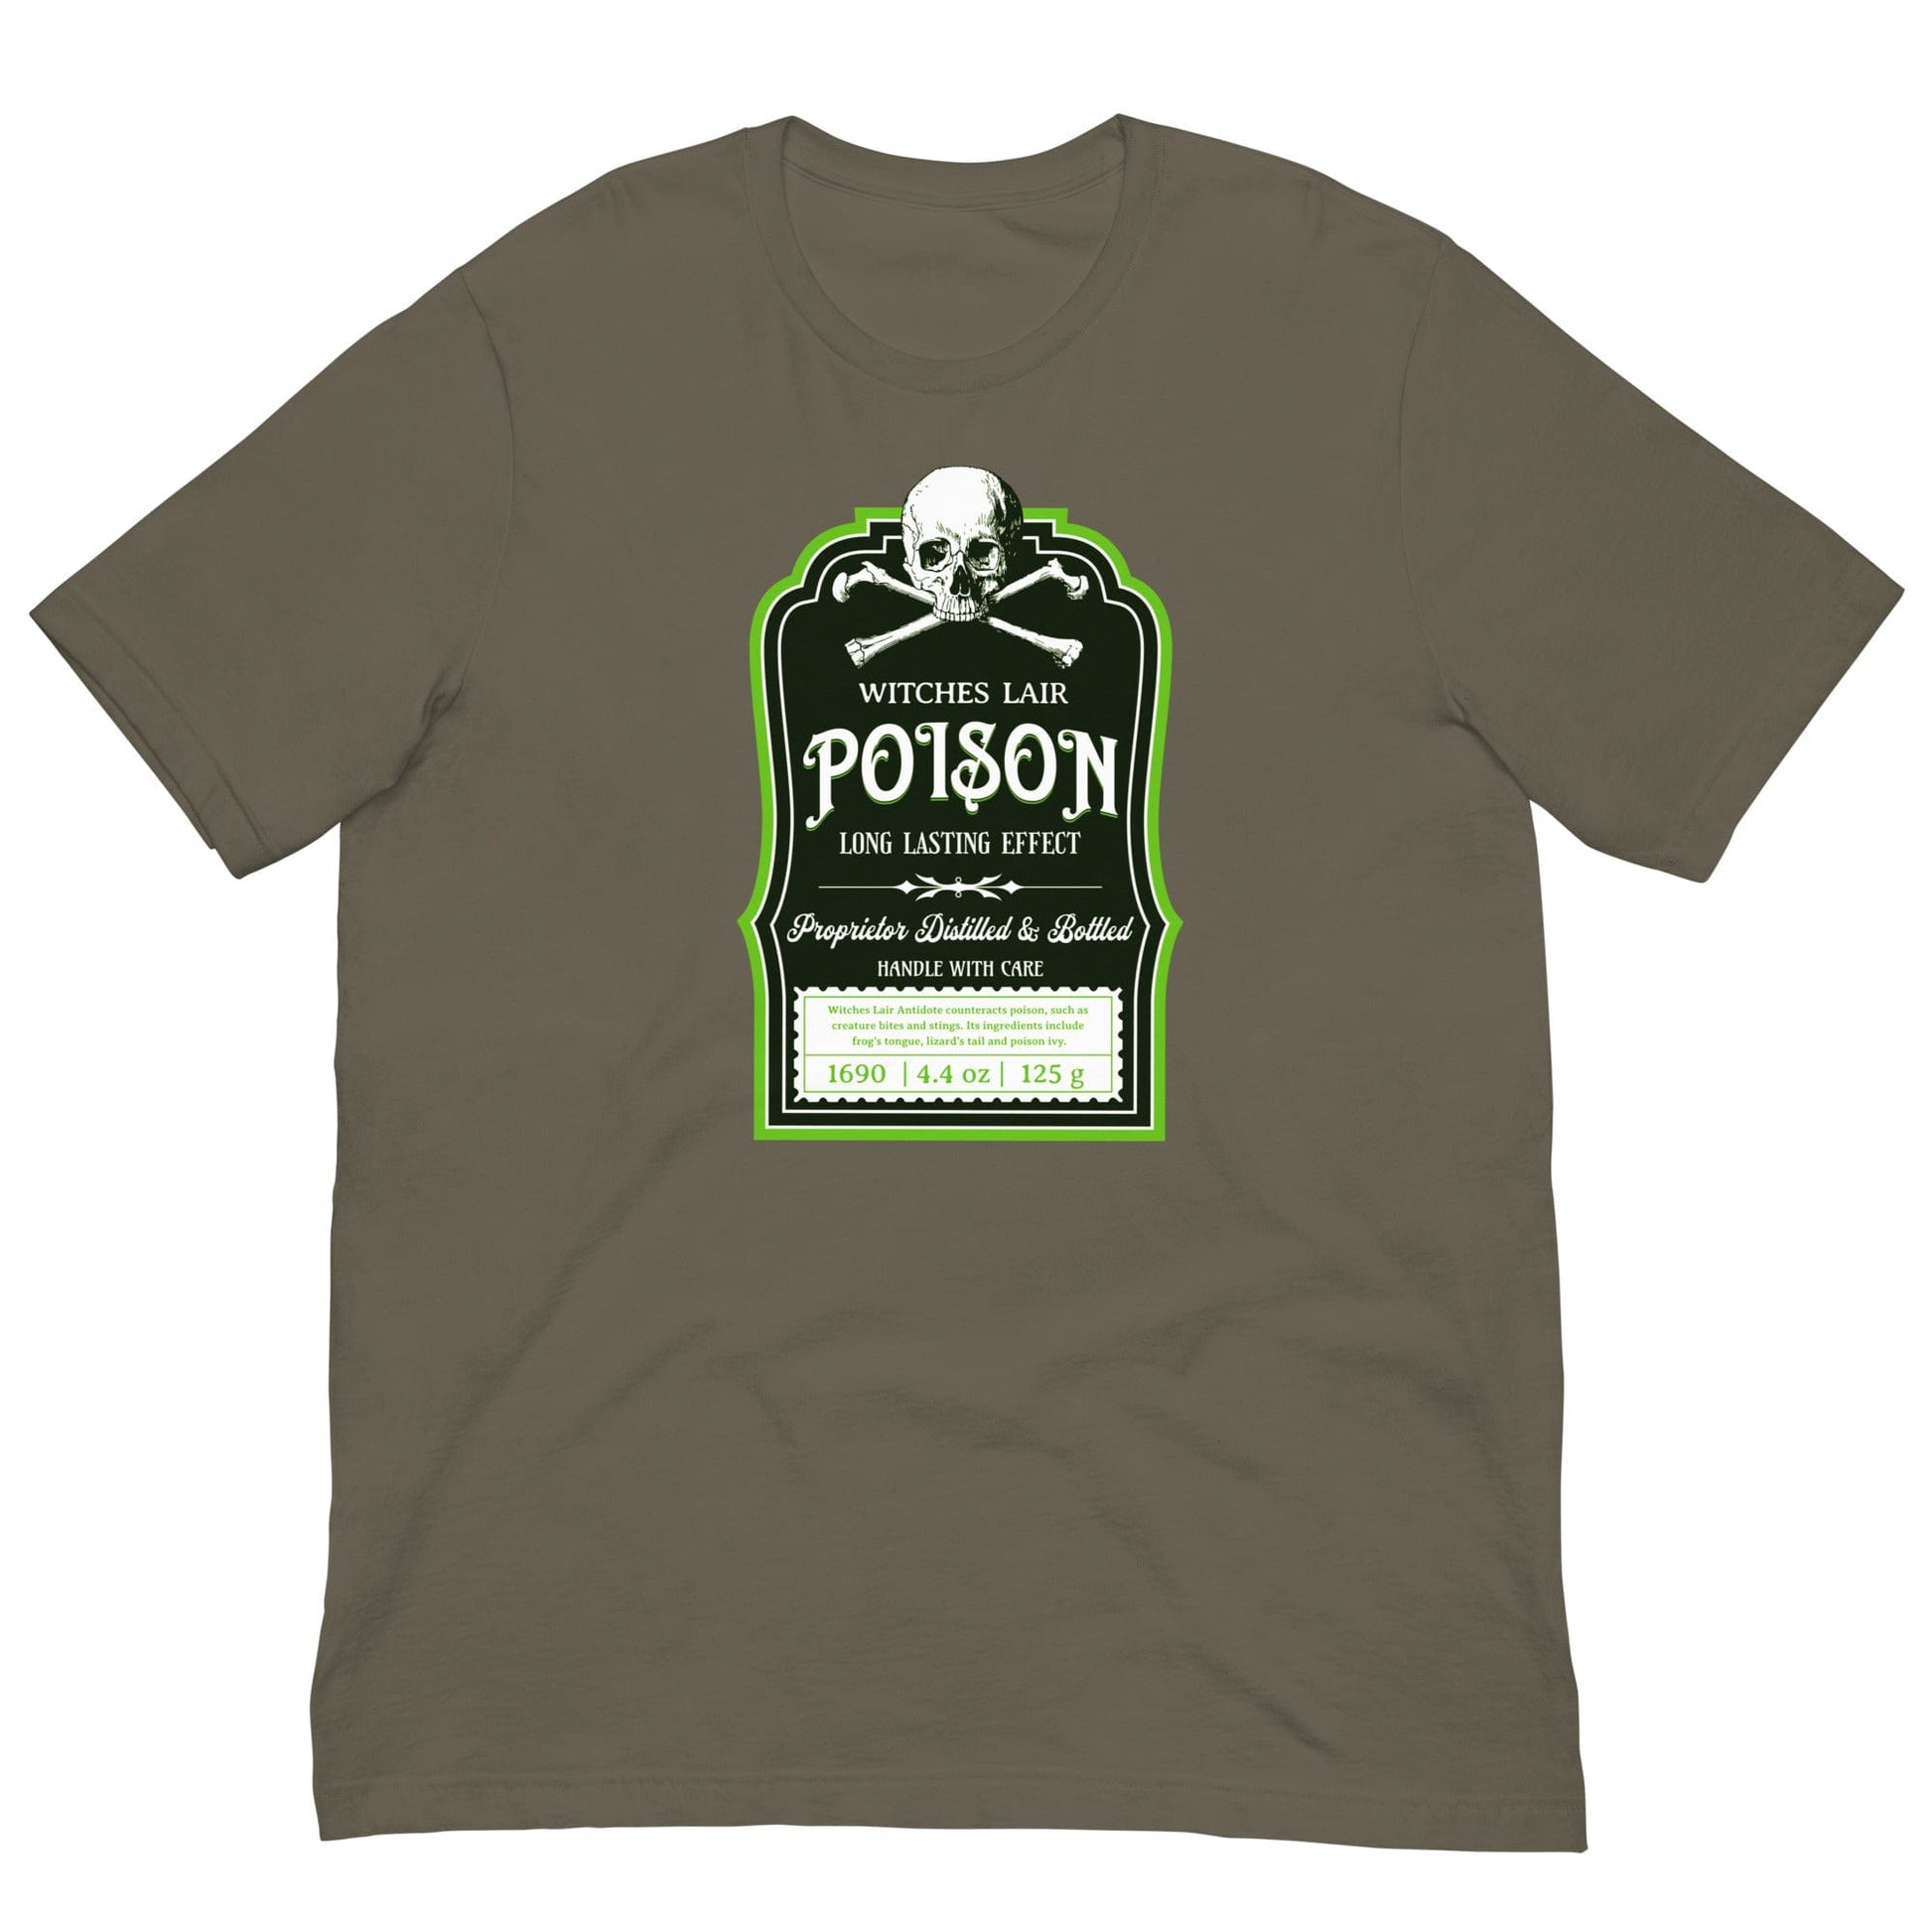 Witches Lair Poison T-shirt Army / S